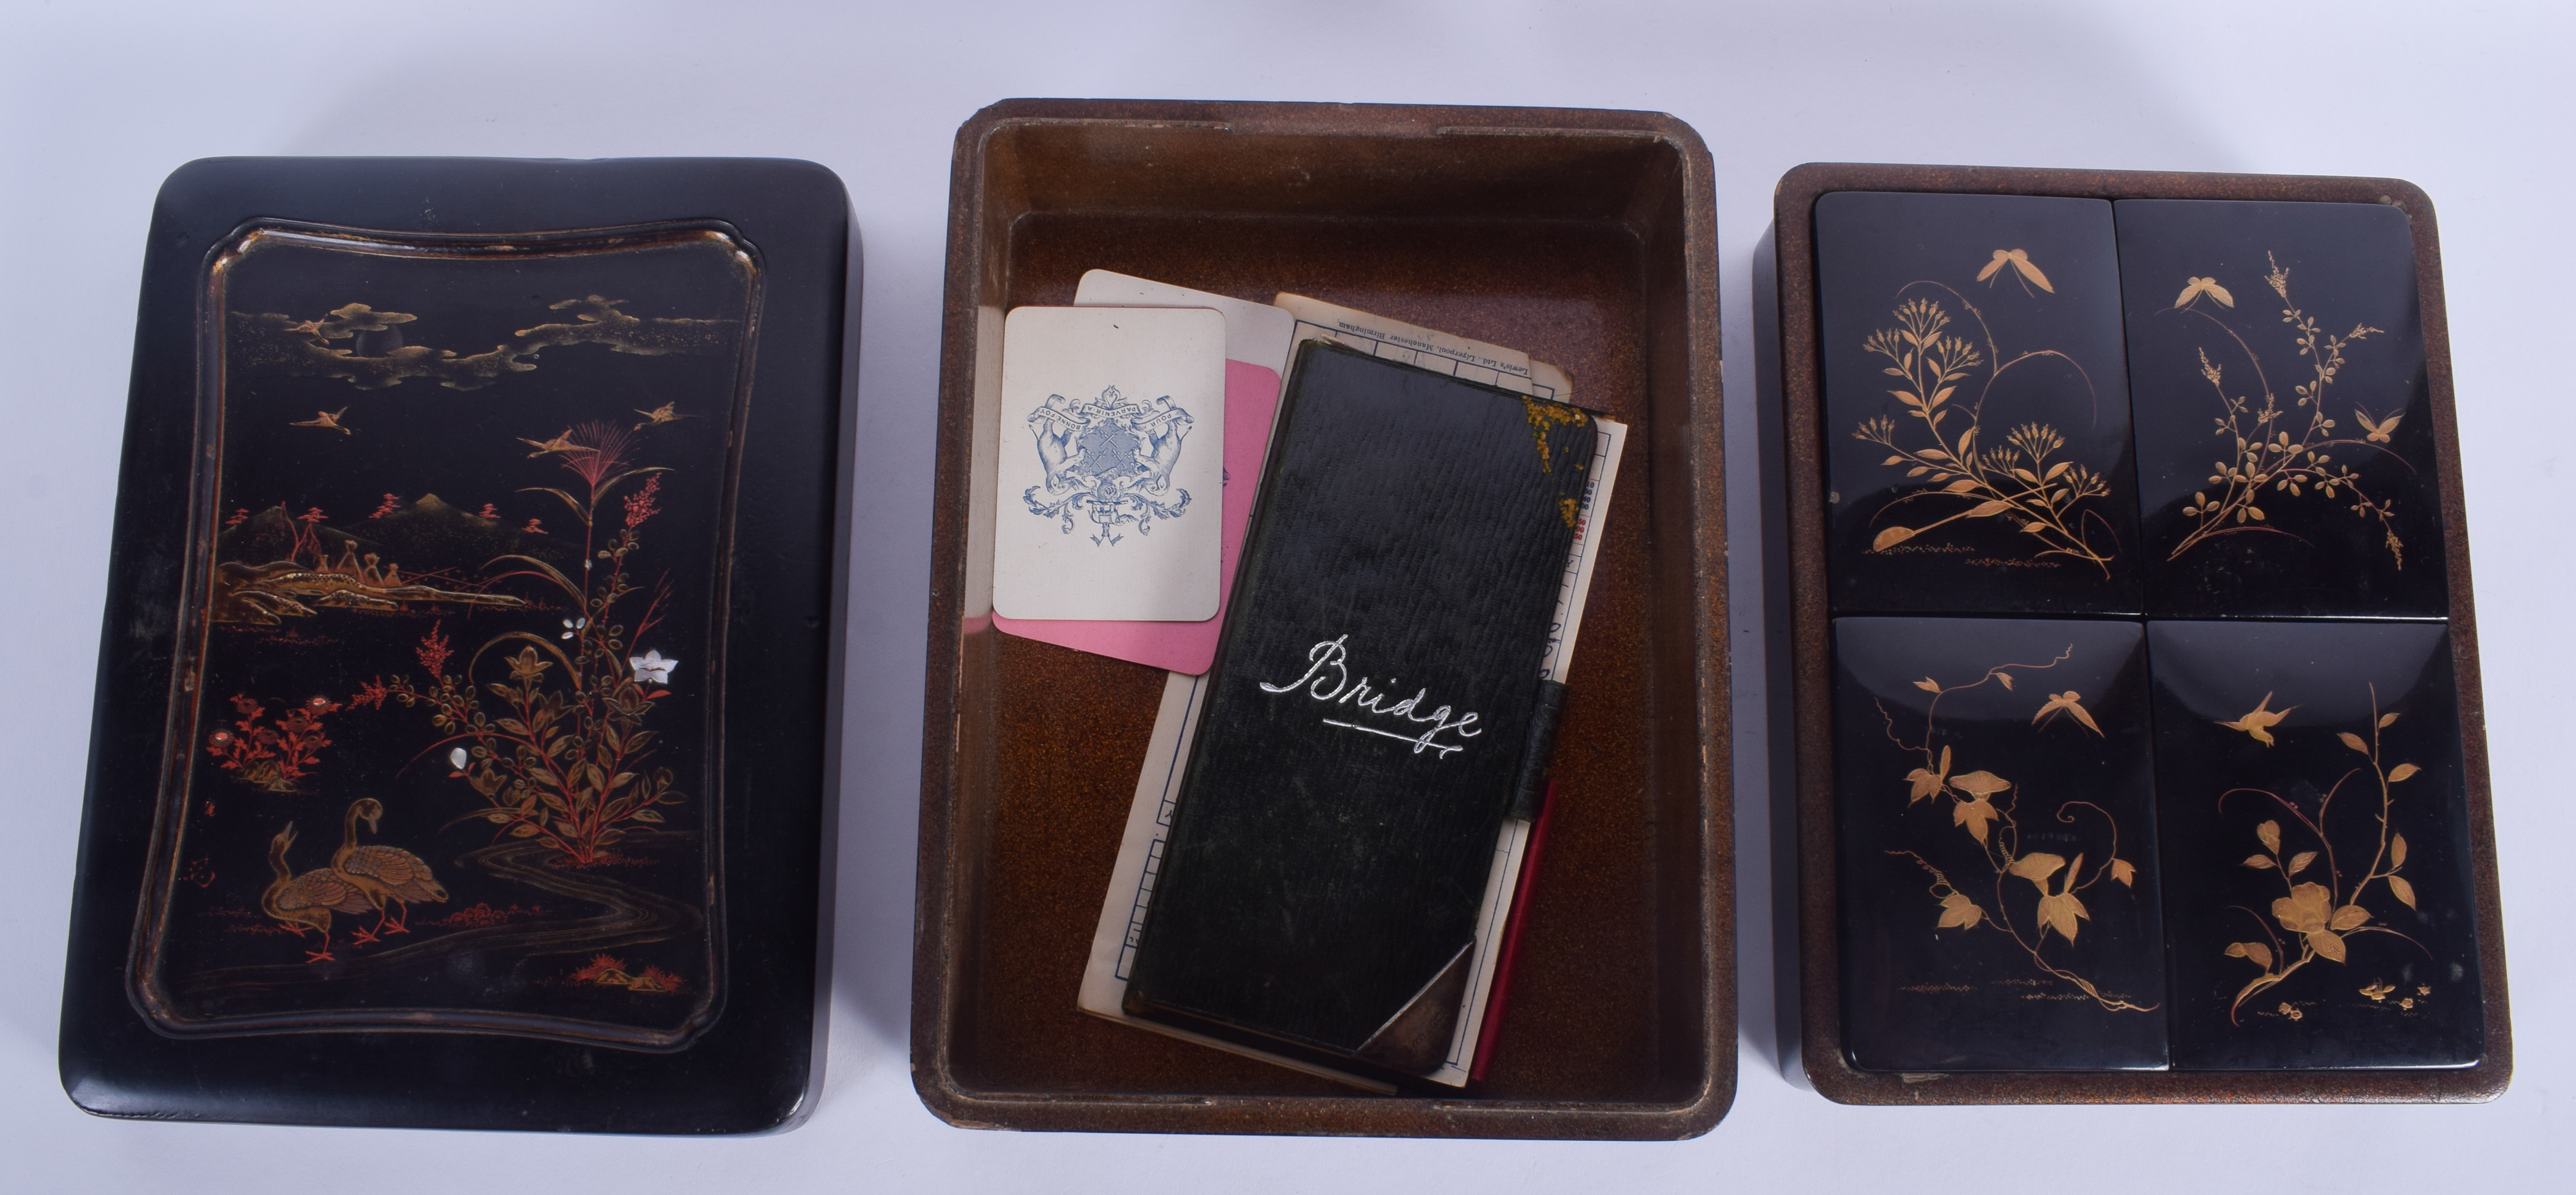 A 19TH CENTURY JAPANESE BLACK LACQUER BOX AND COVER containing four lacquer boxes & covers. 19 cm x - Image 3 of 4